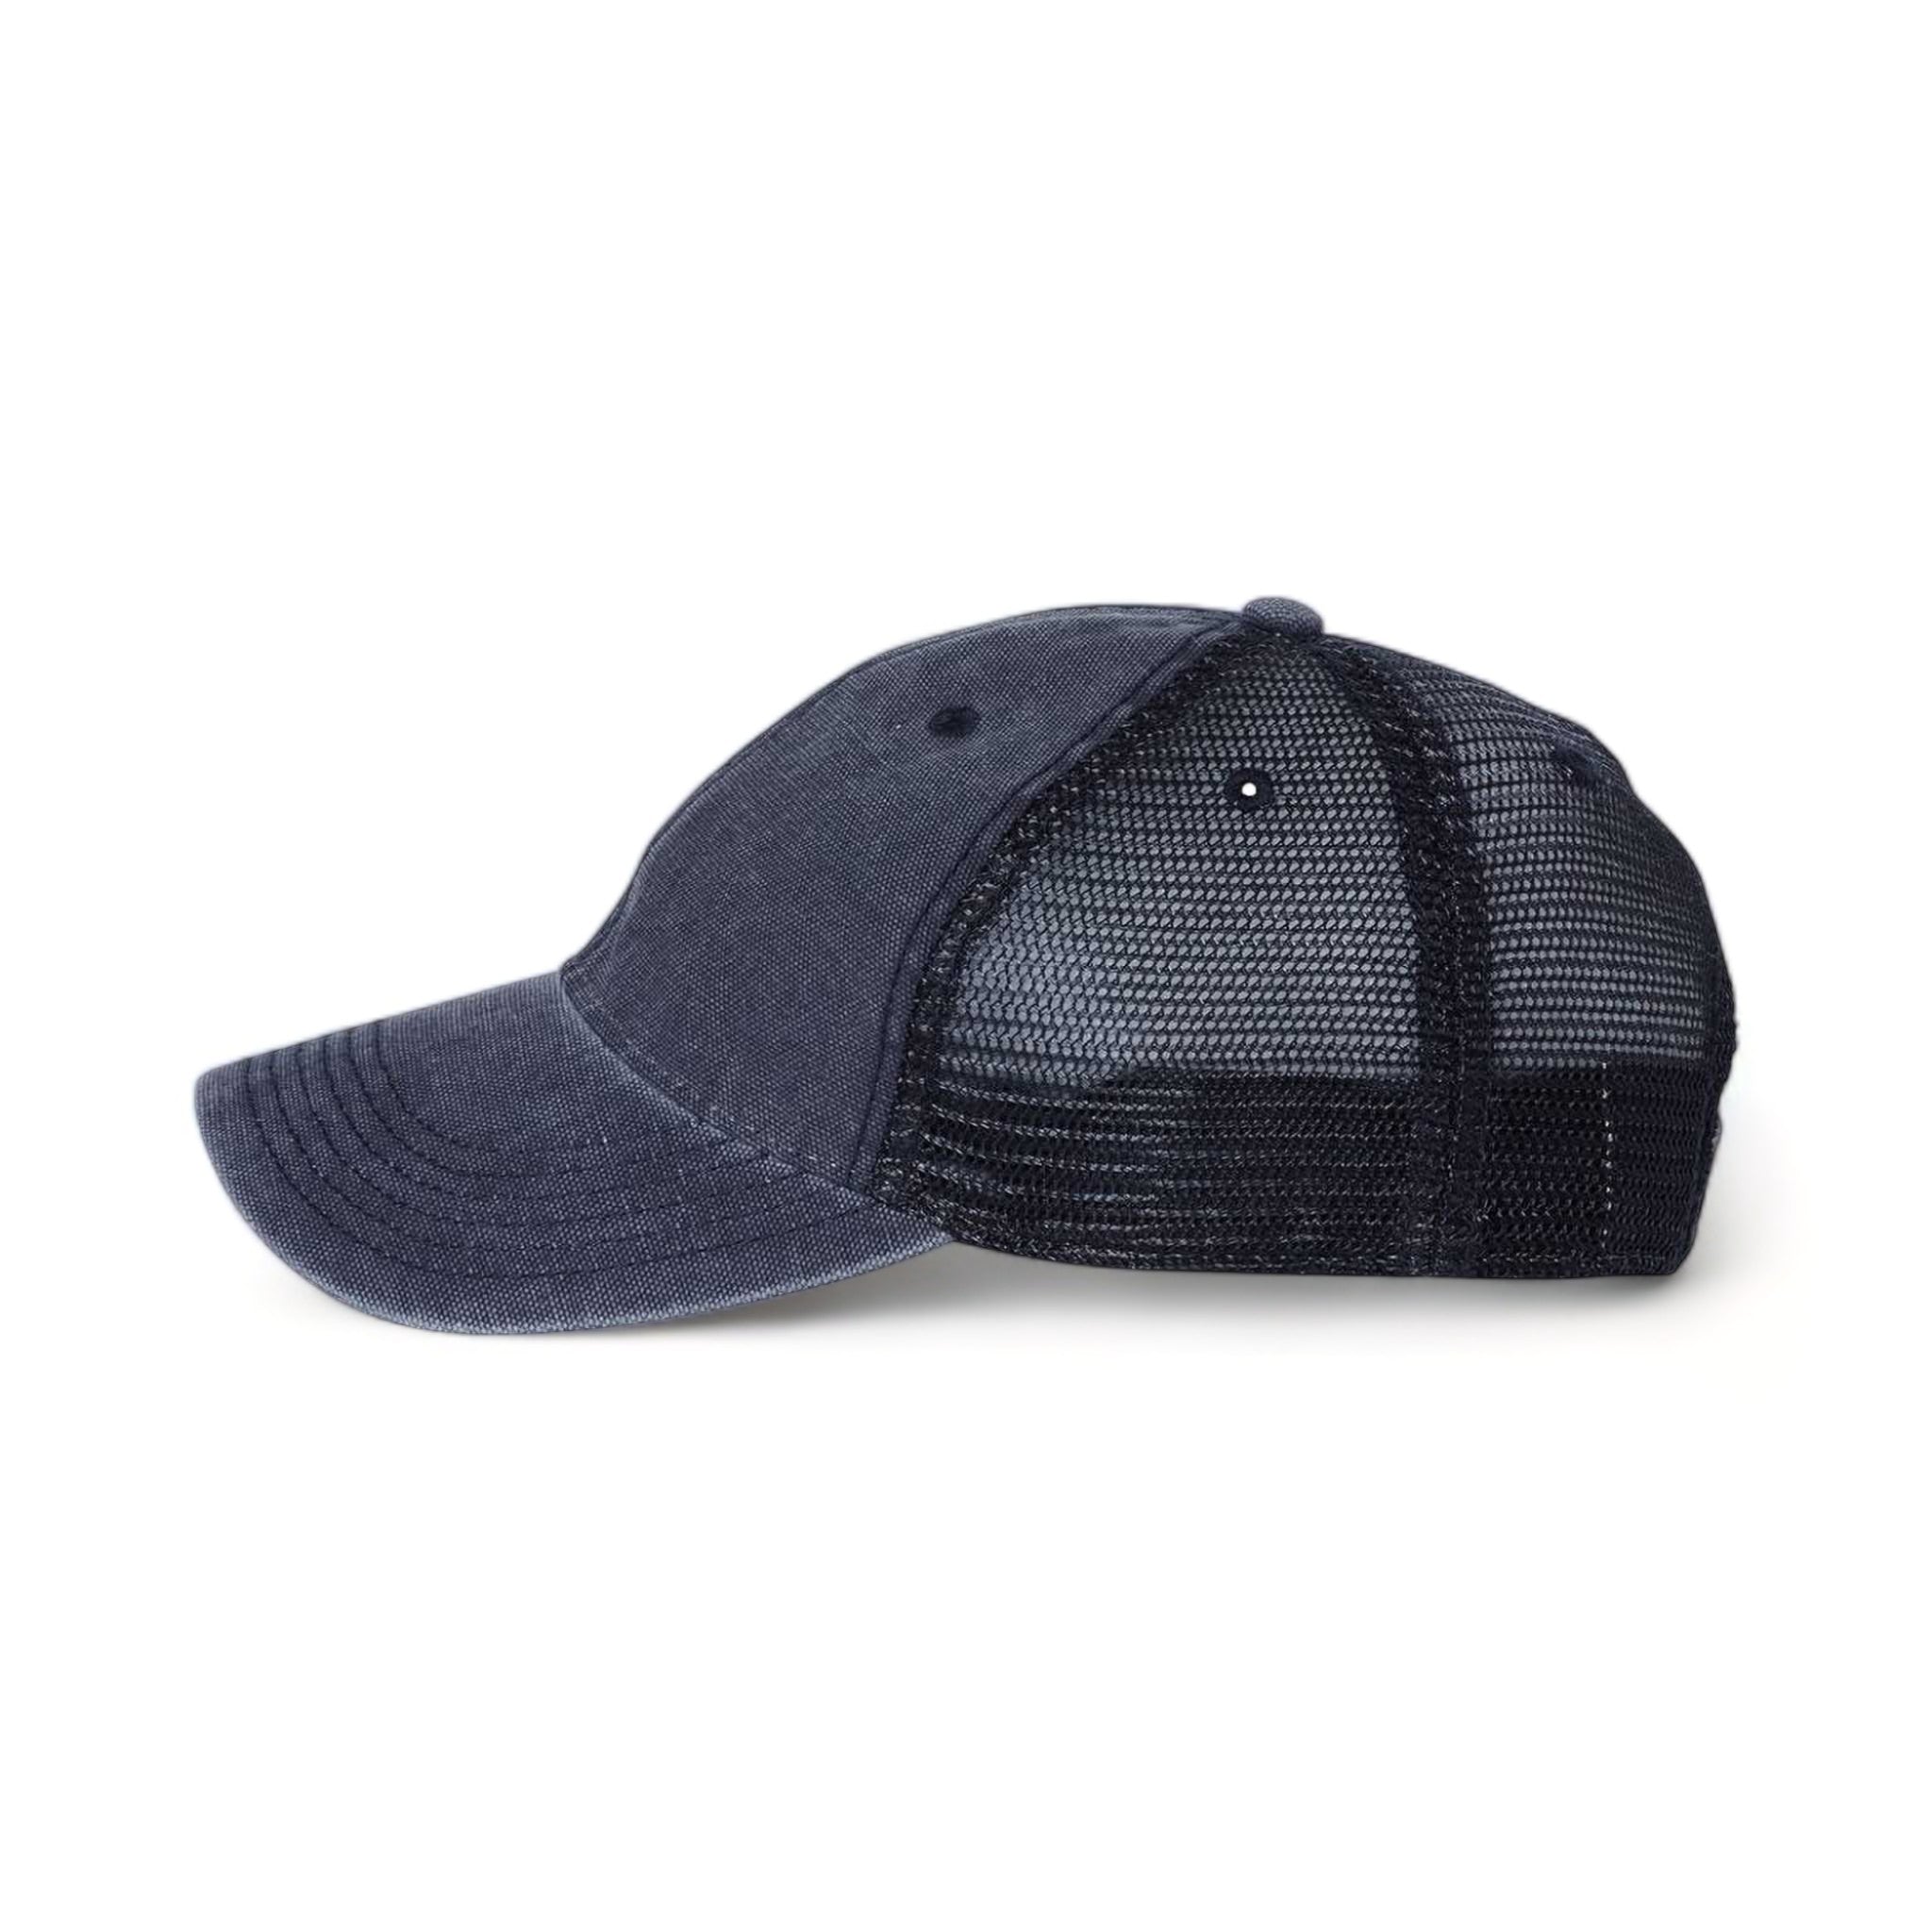 Side view of LEGACY DTA custom hat in navy